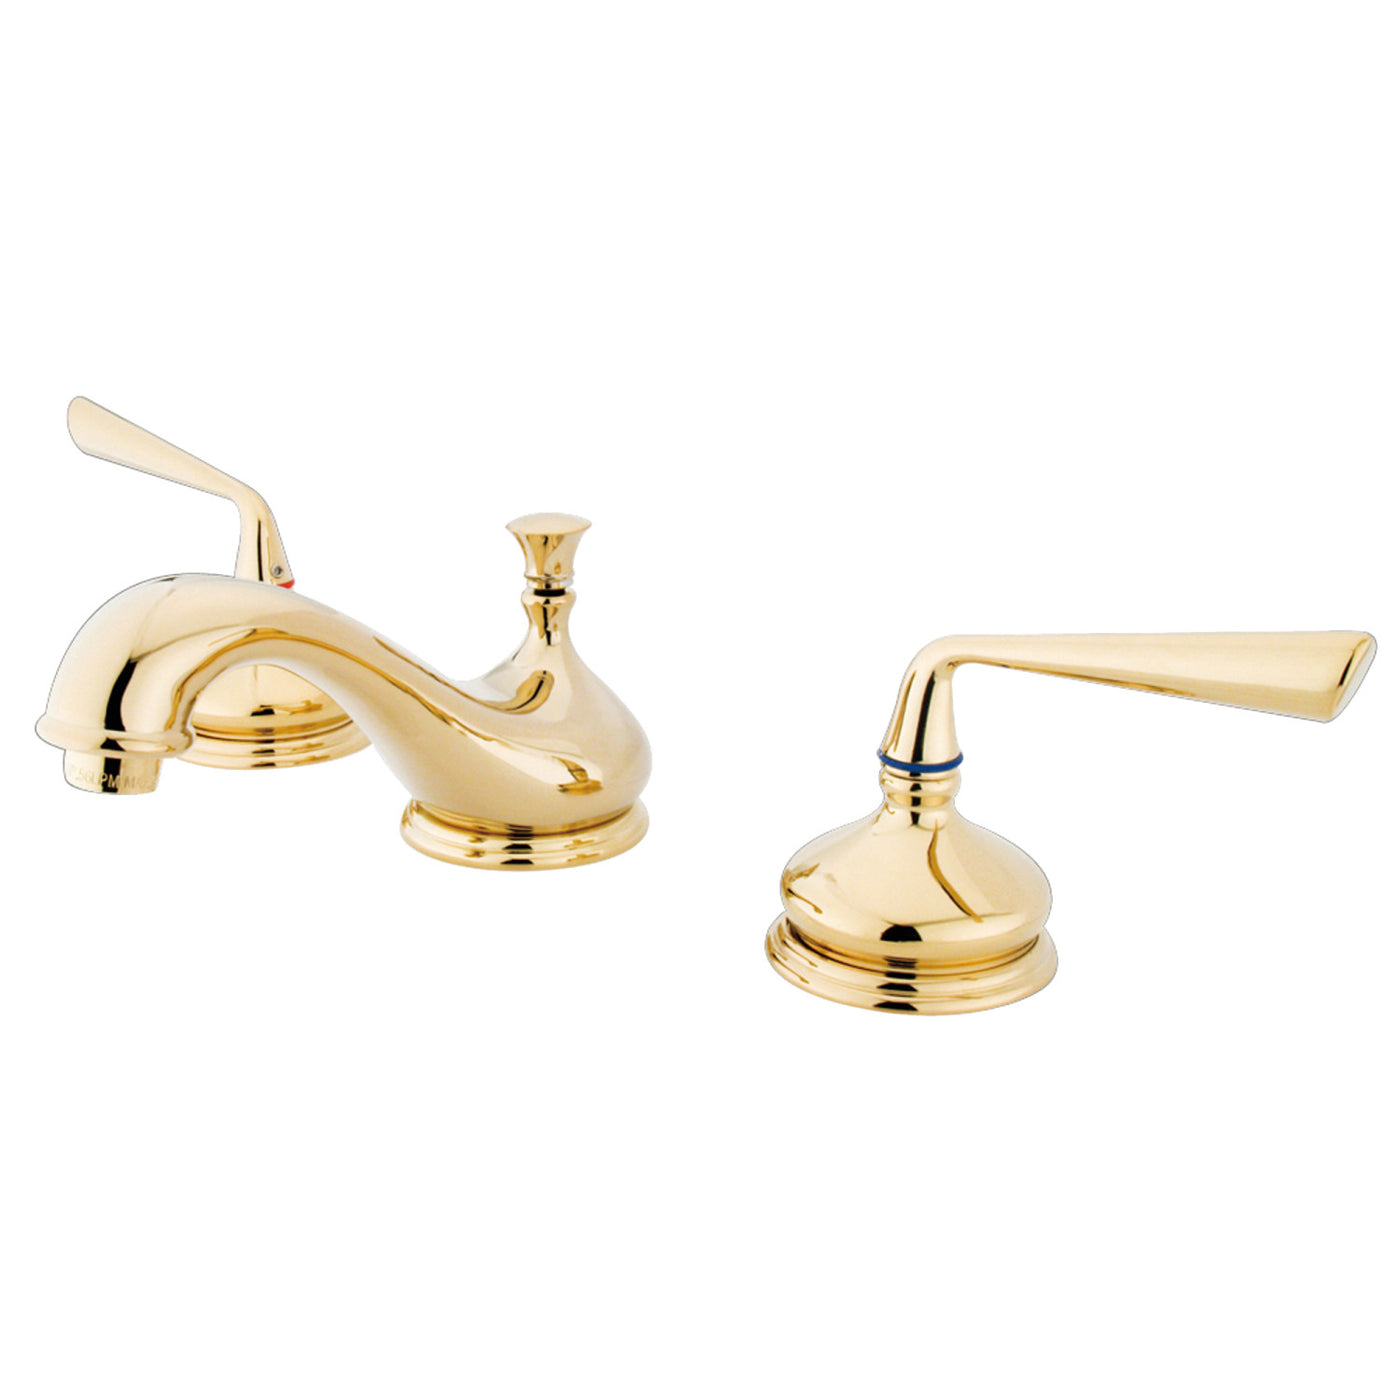 Elements of Design ES1162ZL Widespread Bathroom Faucet with Brass Pop-Up, Polished Brass